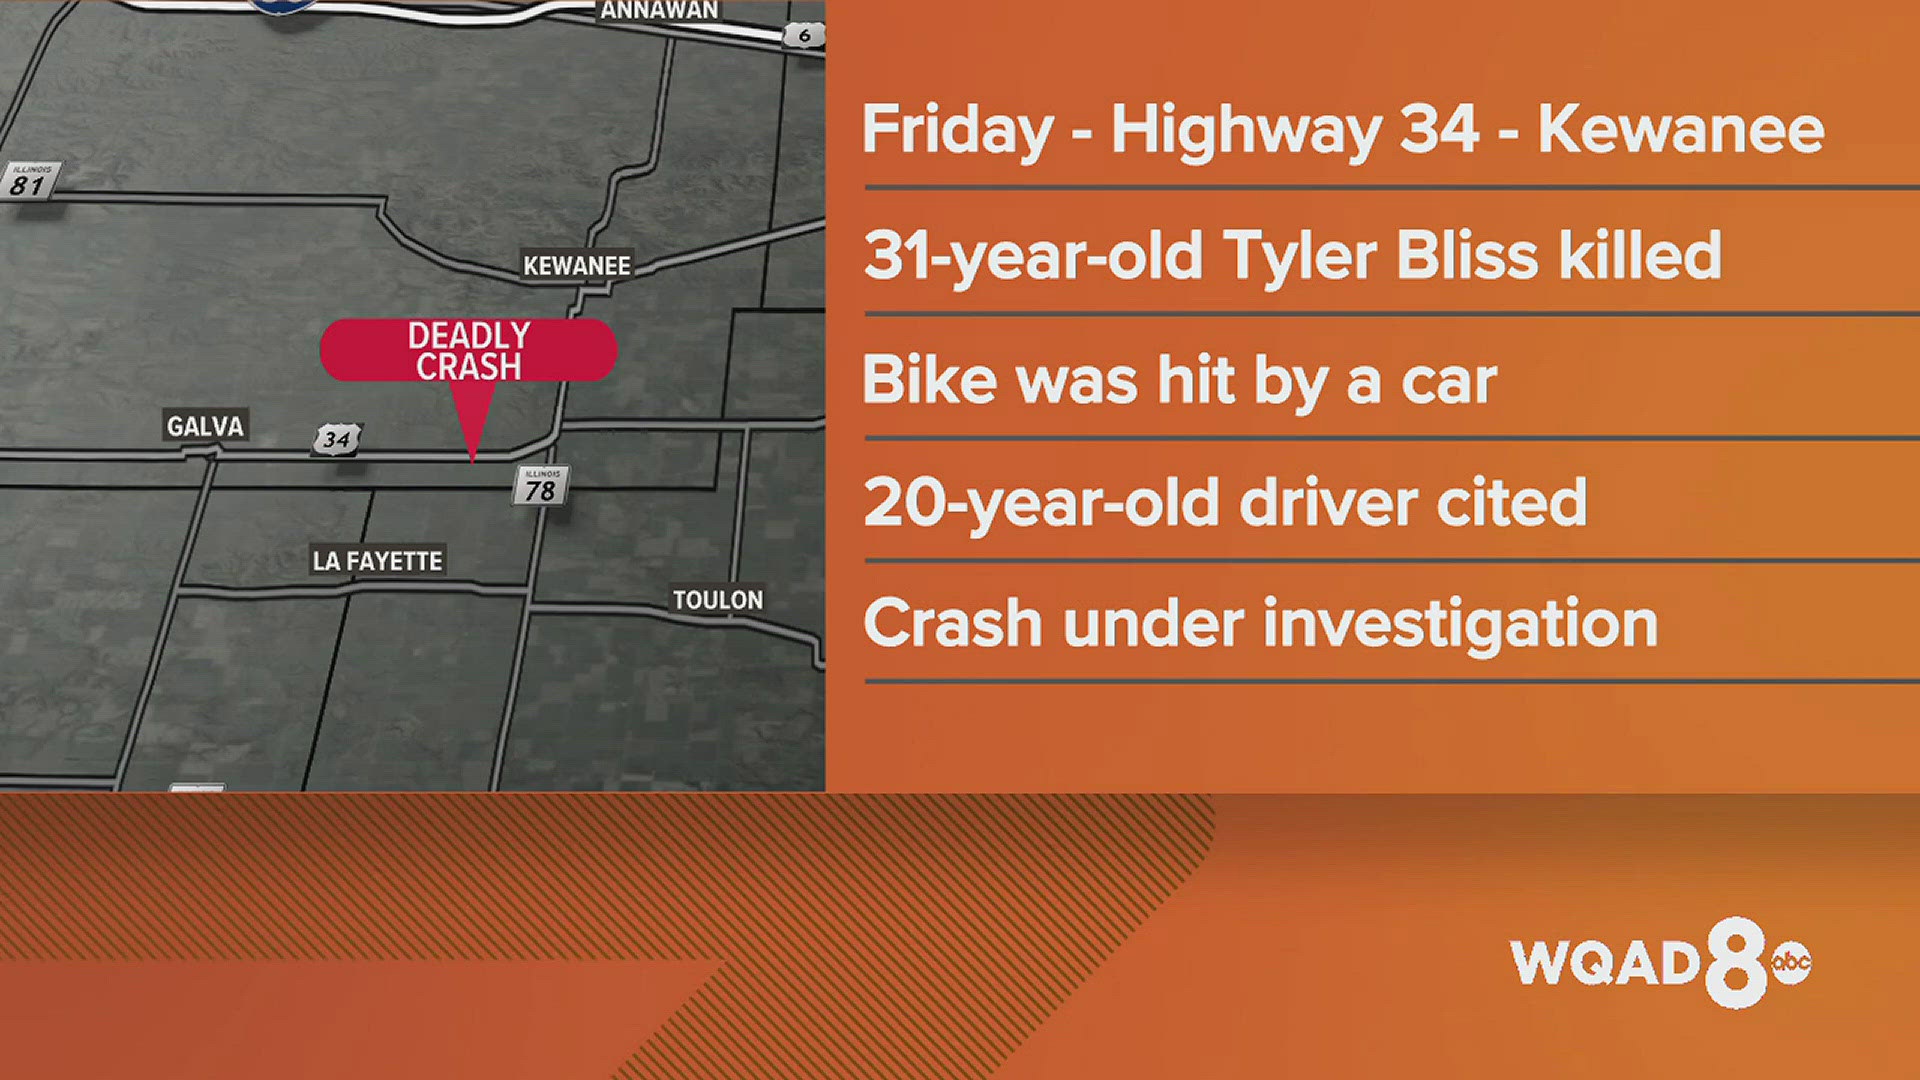 Henry County officials say Tyler Bliss, 31, died at the scene when a 20-year-old driver hit him. Police say this case remains under investigation.